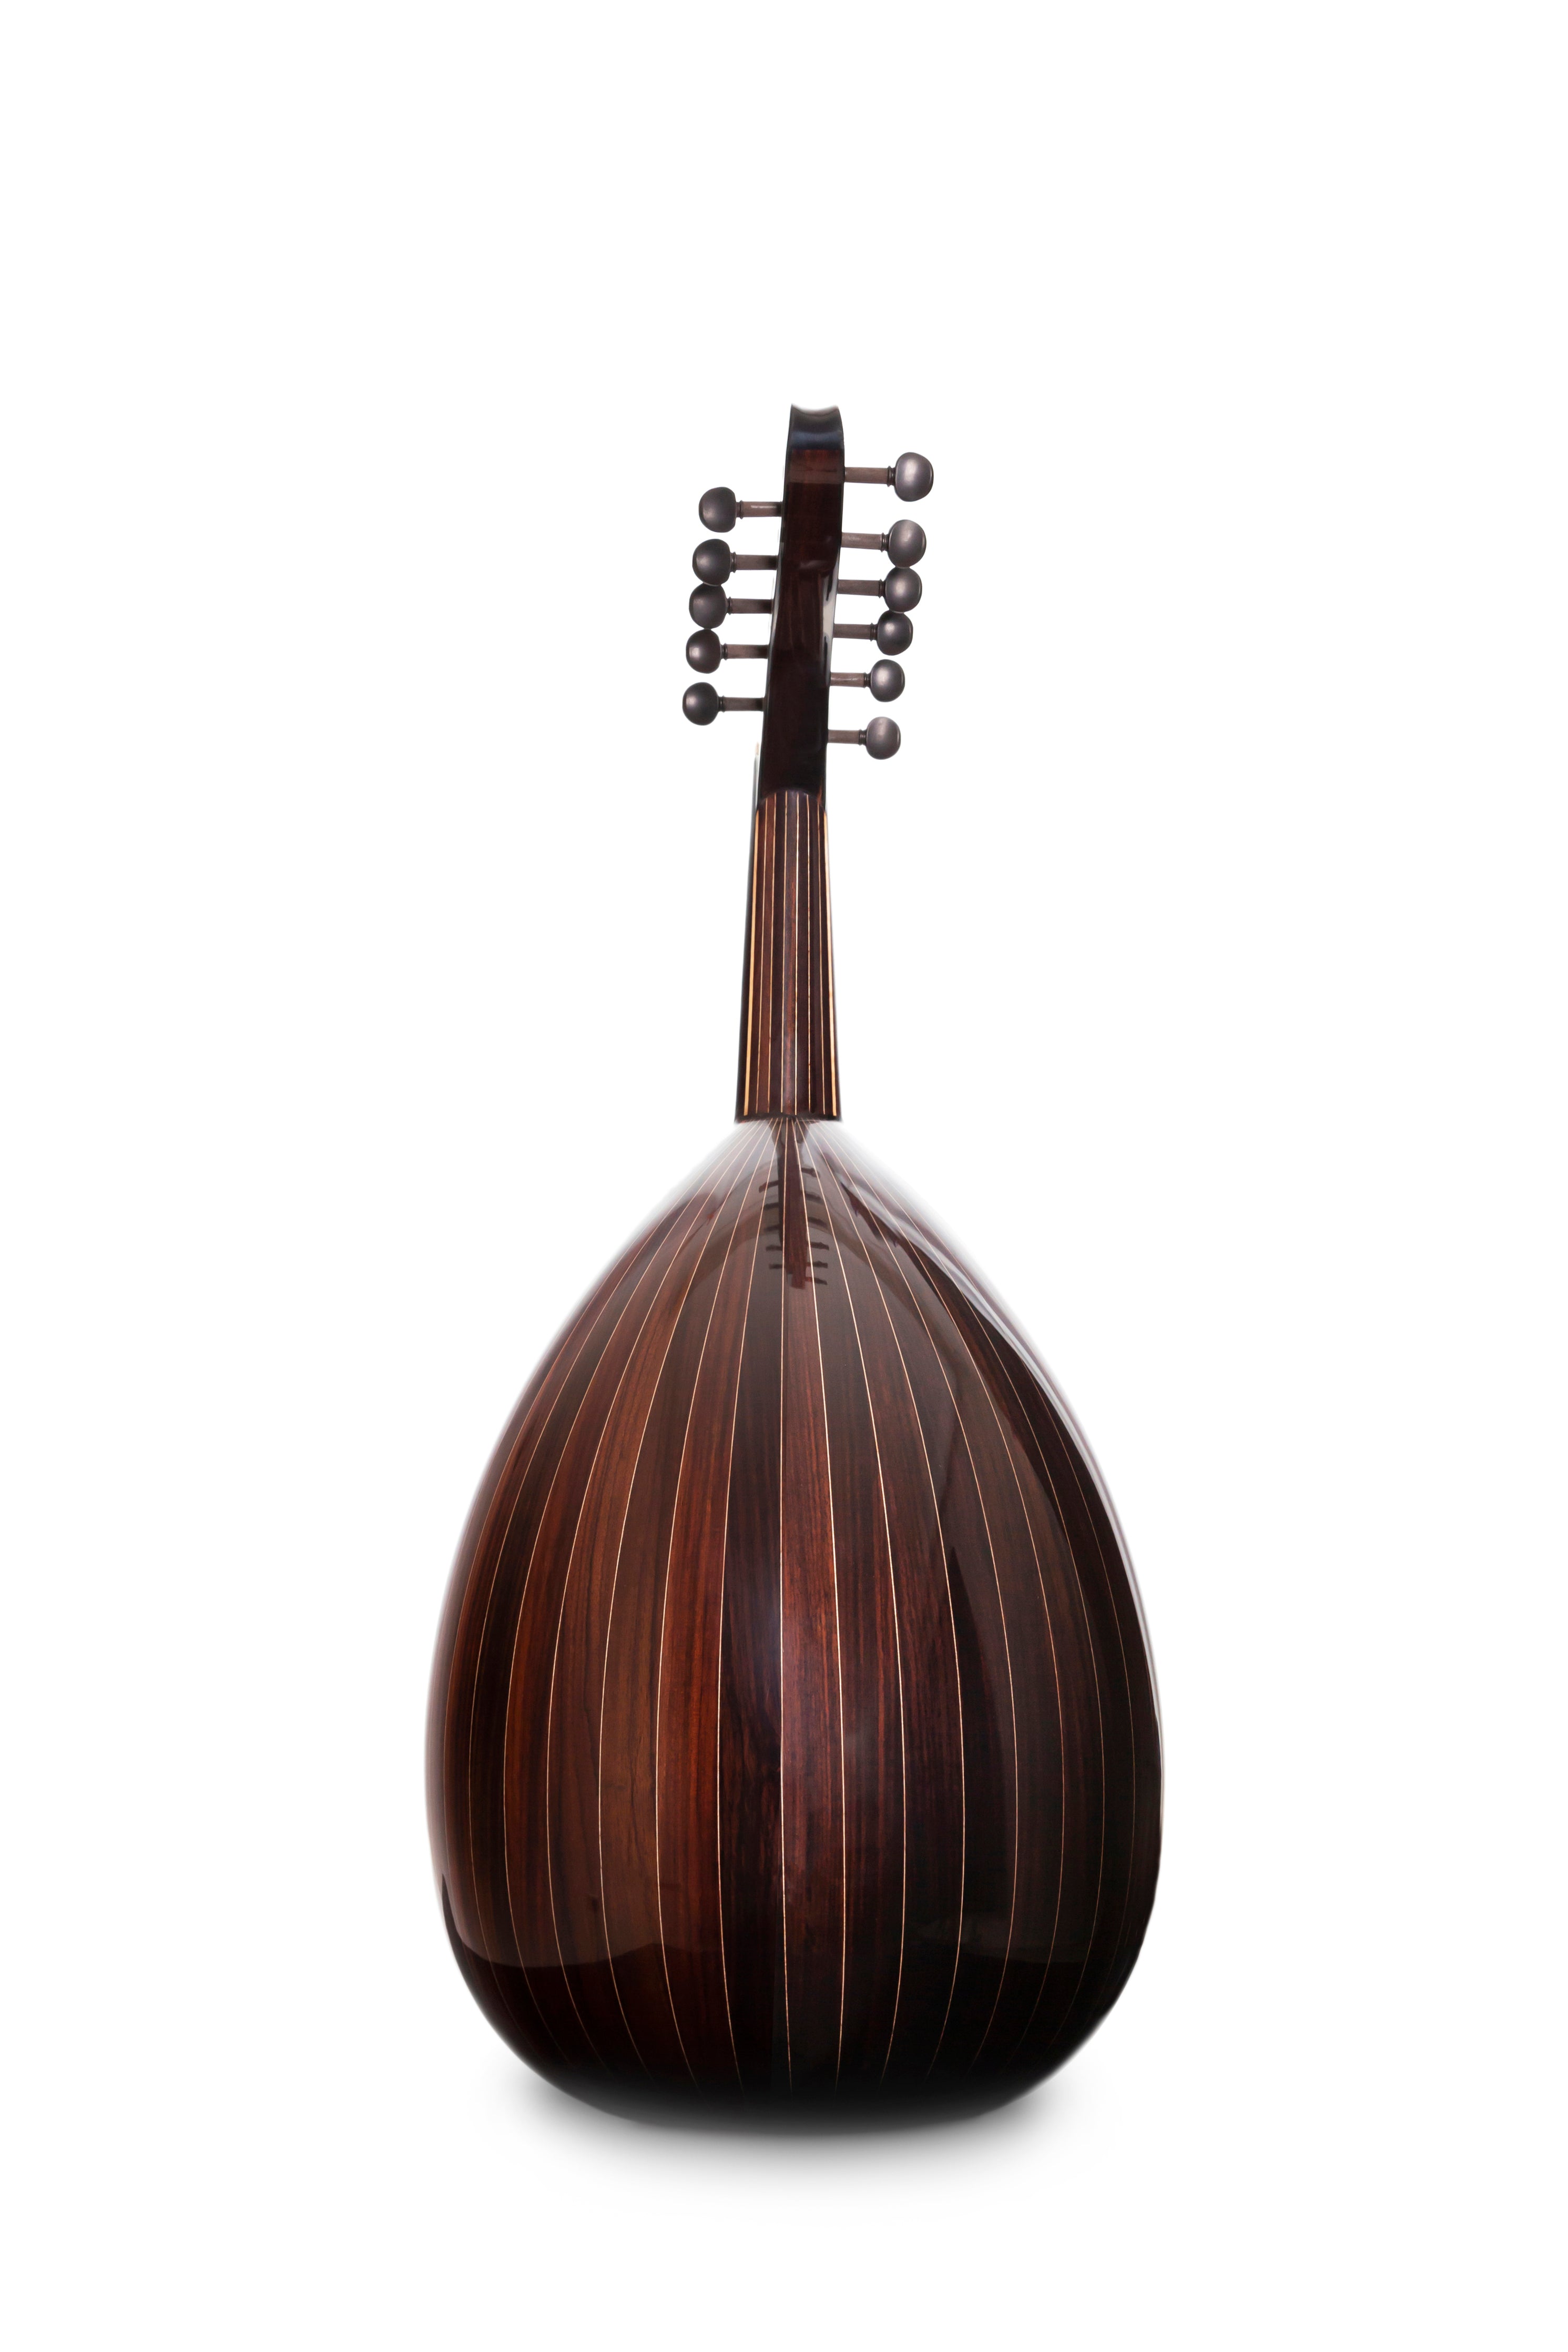 Choose Your Oud Instrument!